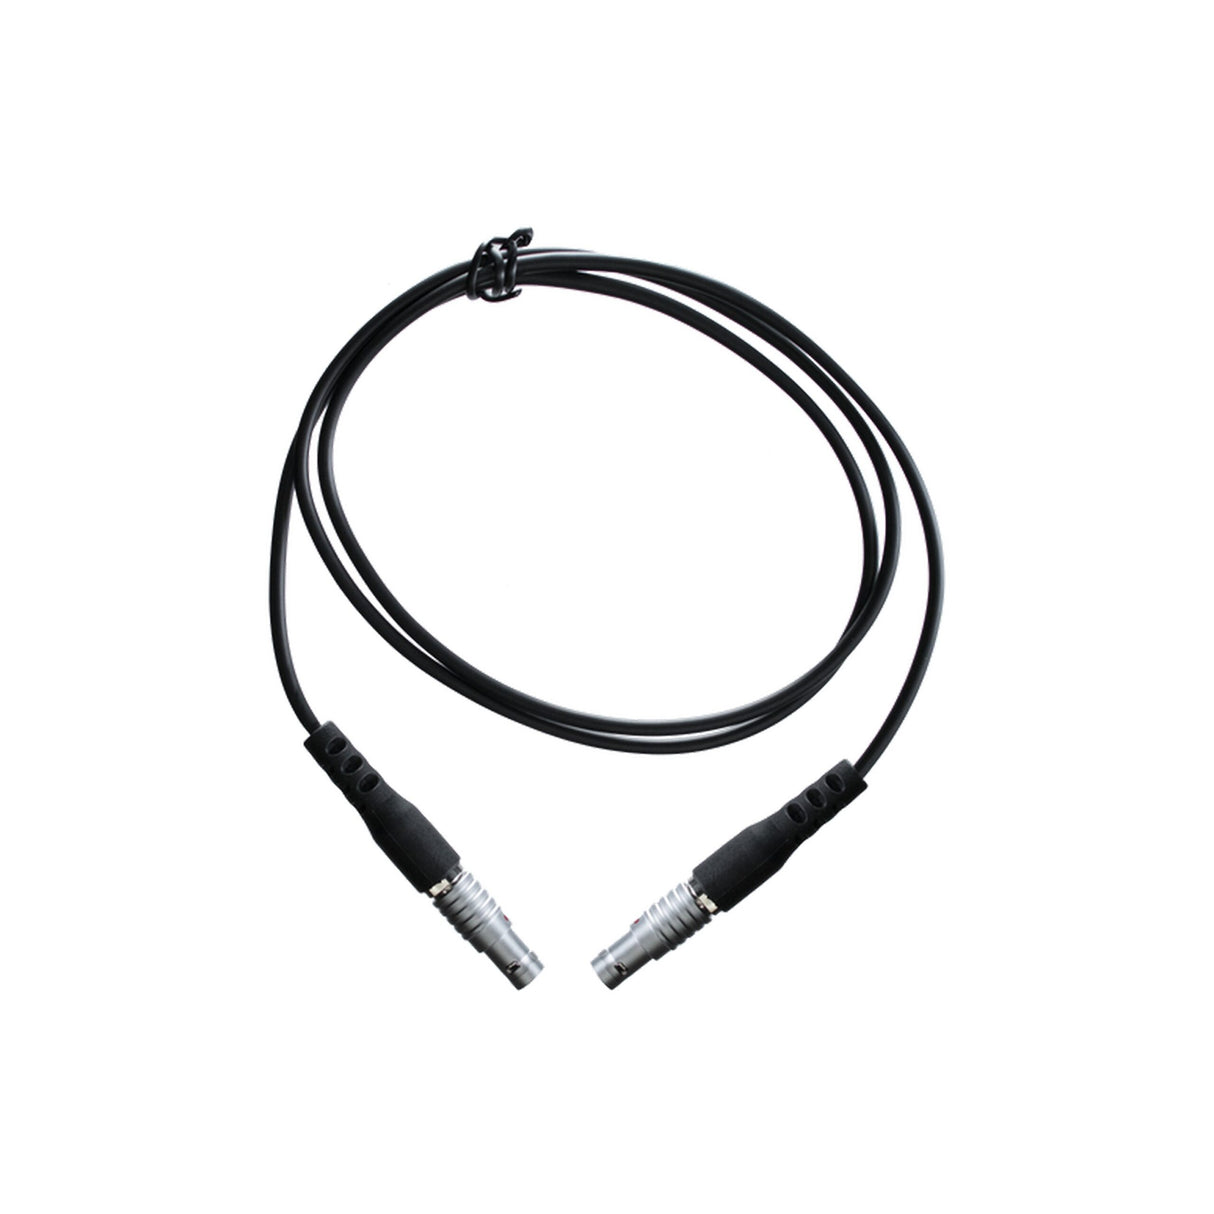 SmallHD RED EXT 9-Pin to 5-Pin USB Camera-Control Cable, 18 Inch, 17-4305